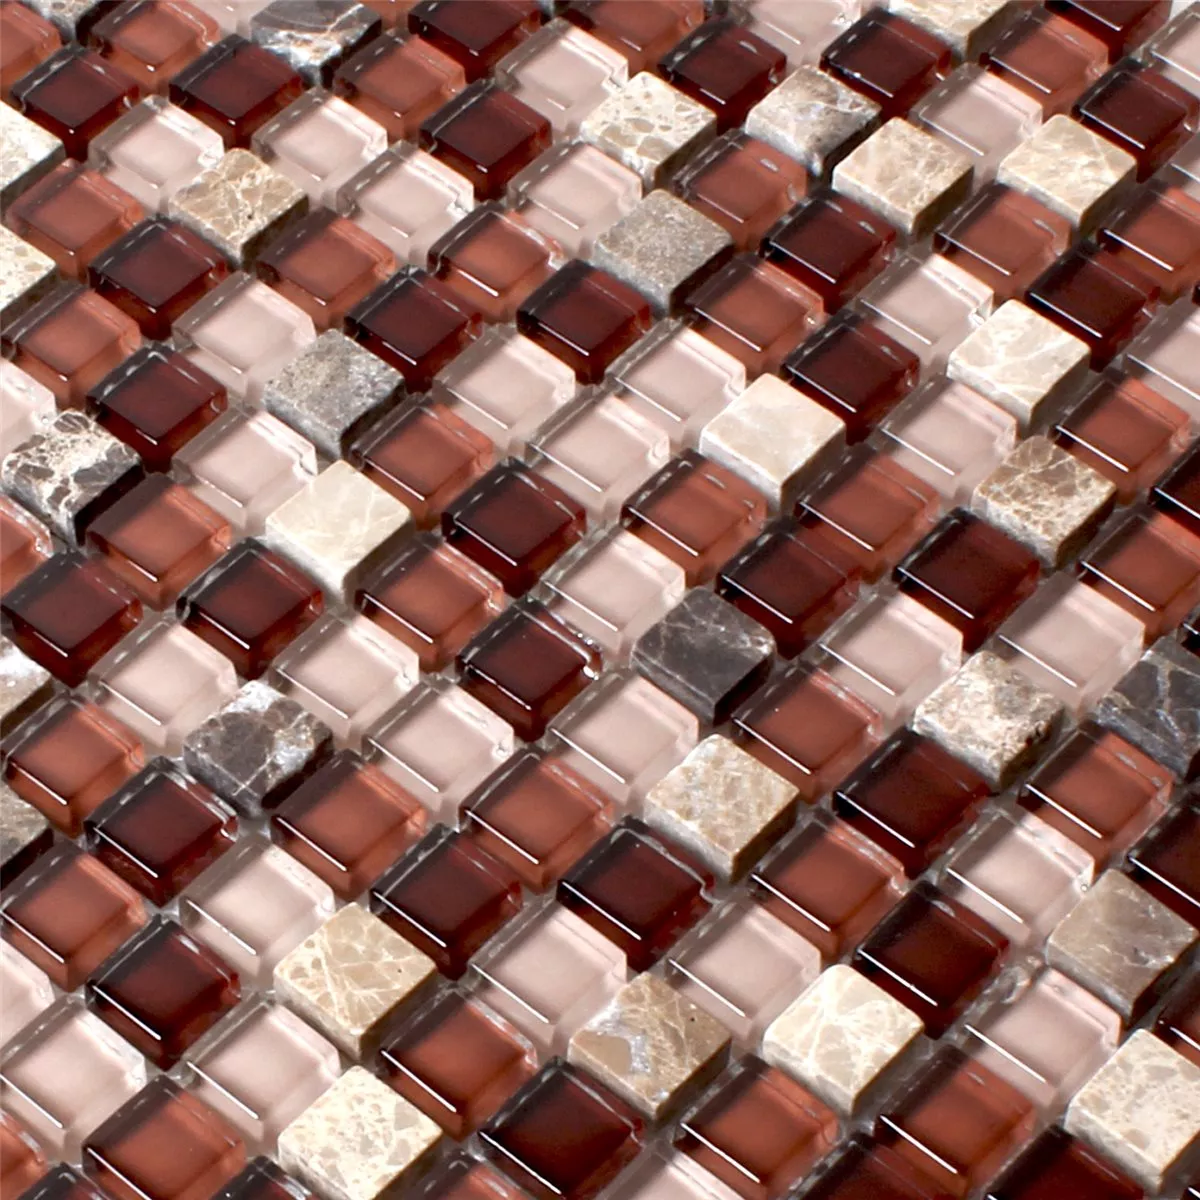 Sample Mosaic Tiles Glass Marble Brown Mix